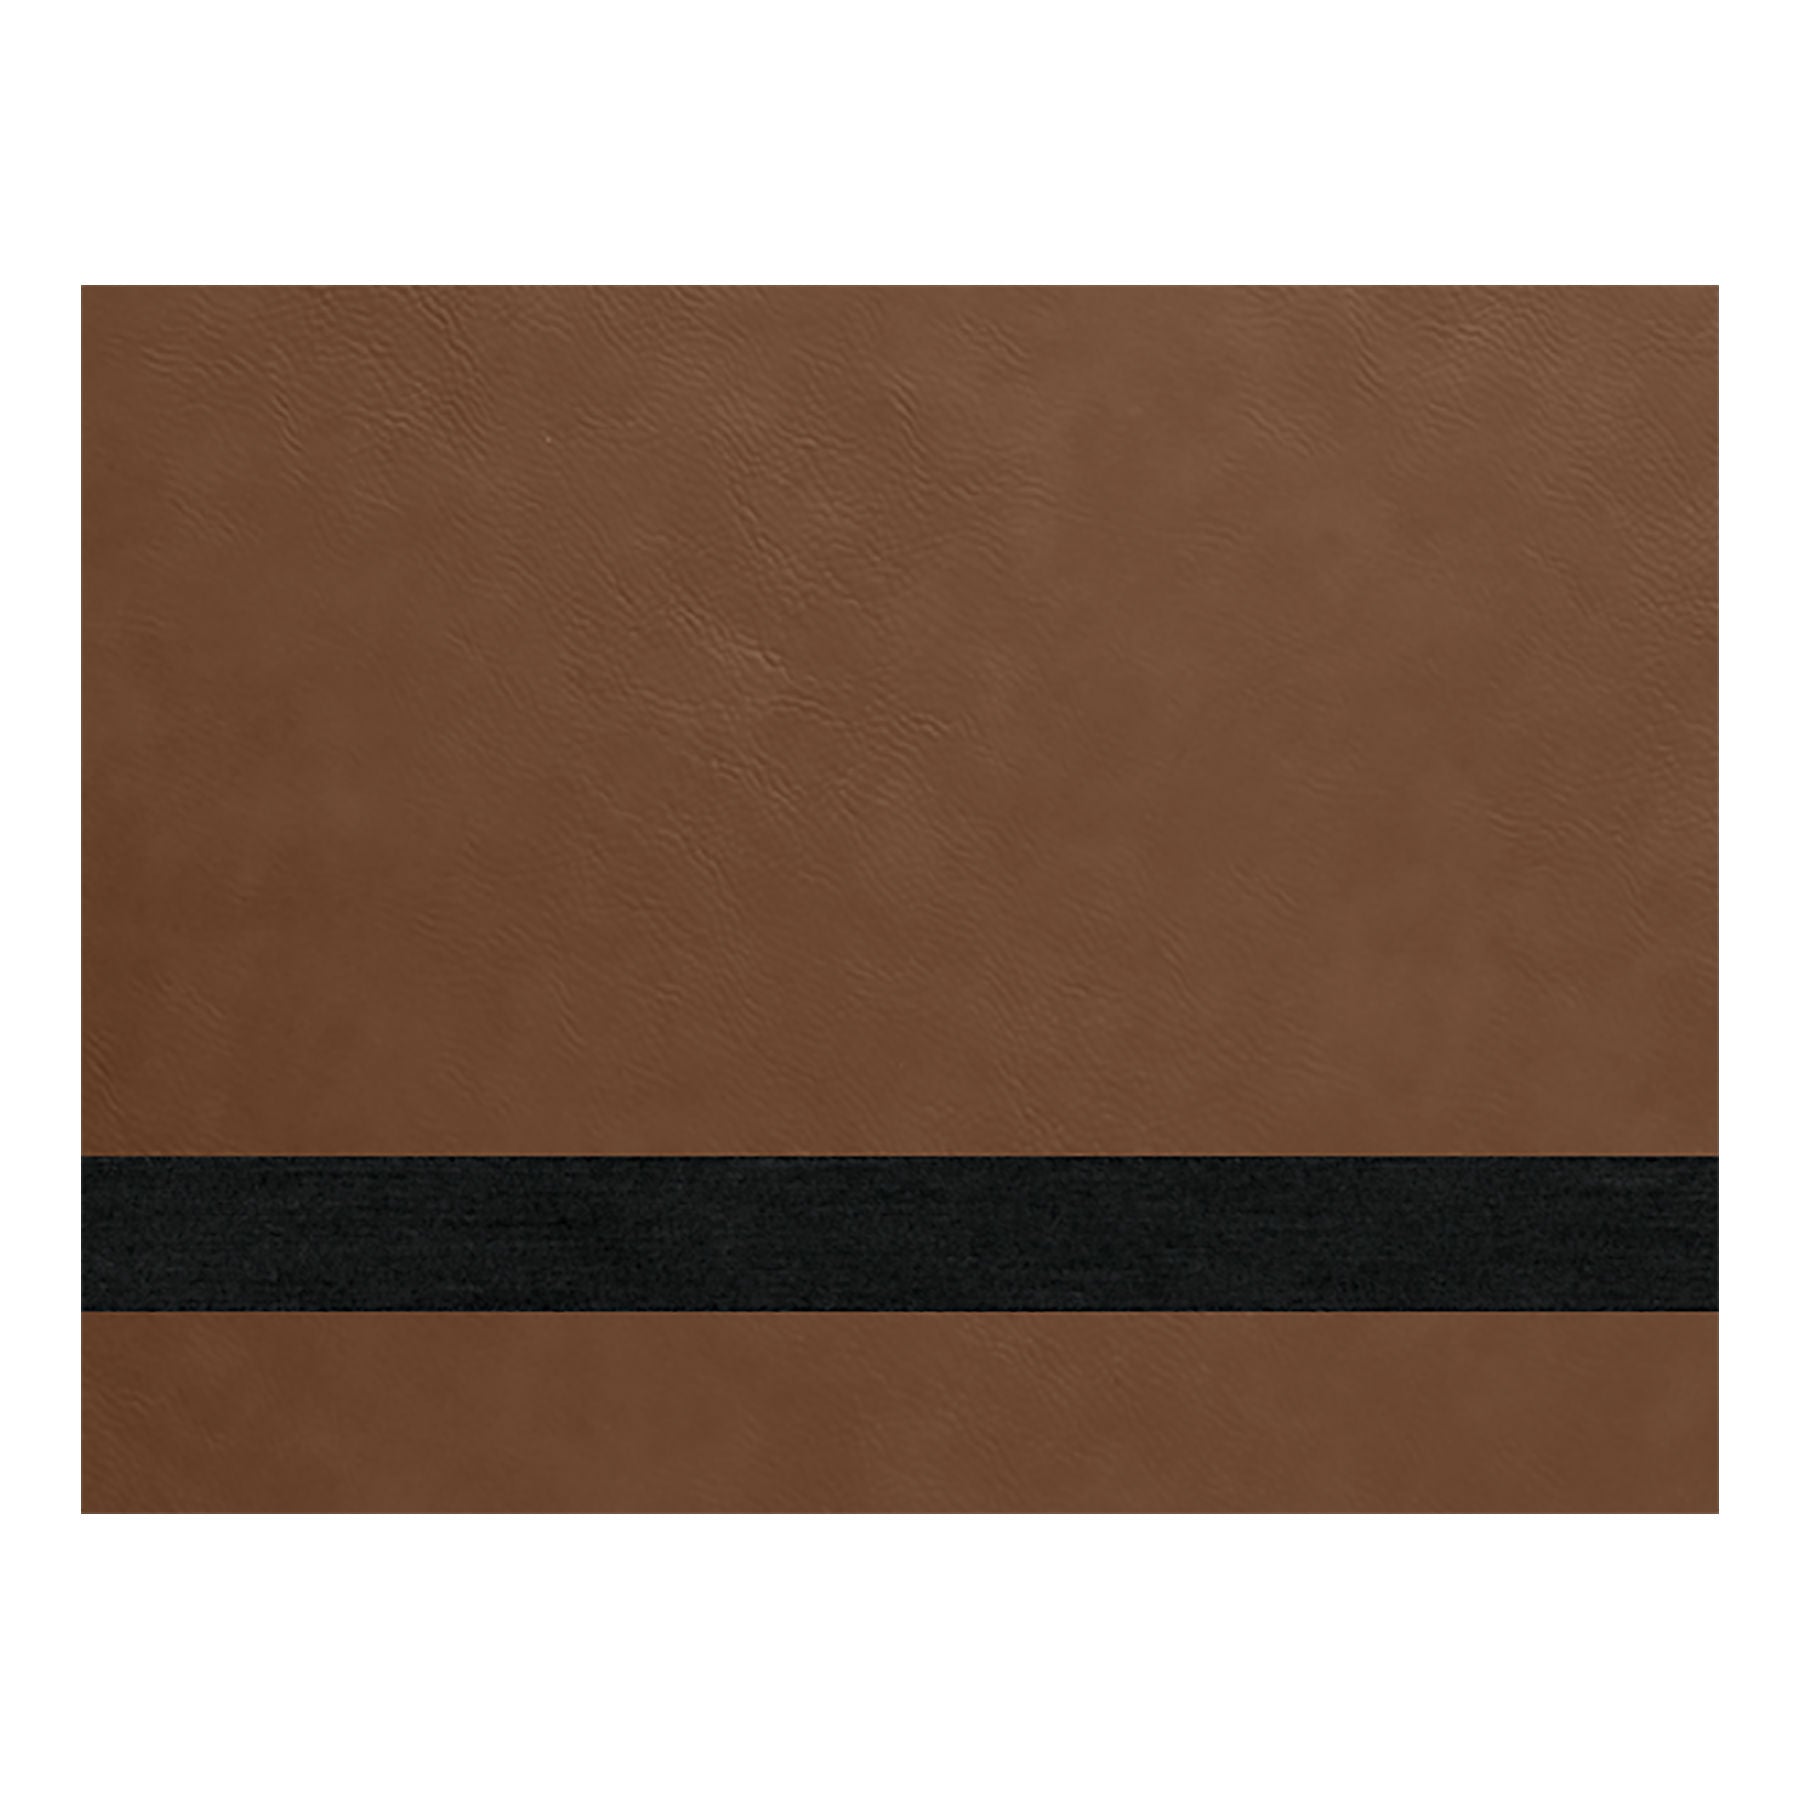 Leather Sheets for Laser Engraving, Laserable Leatherette 12 x 24, Laser  Engraving Supplies, for Glowforge FSL Supplies and Materials